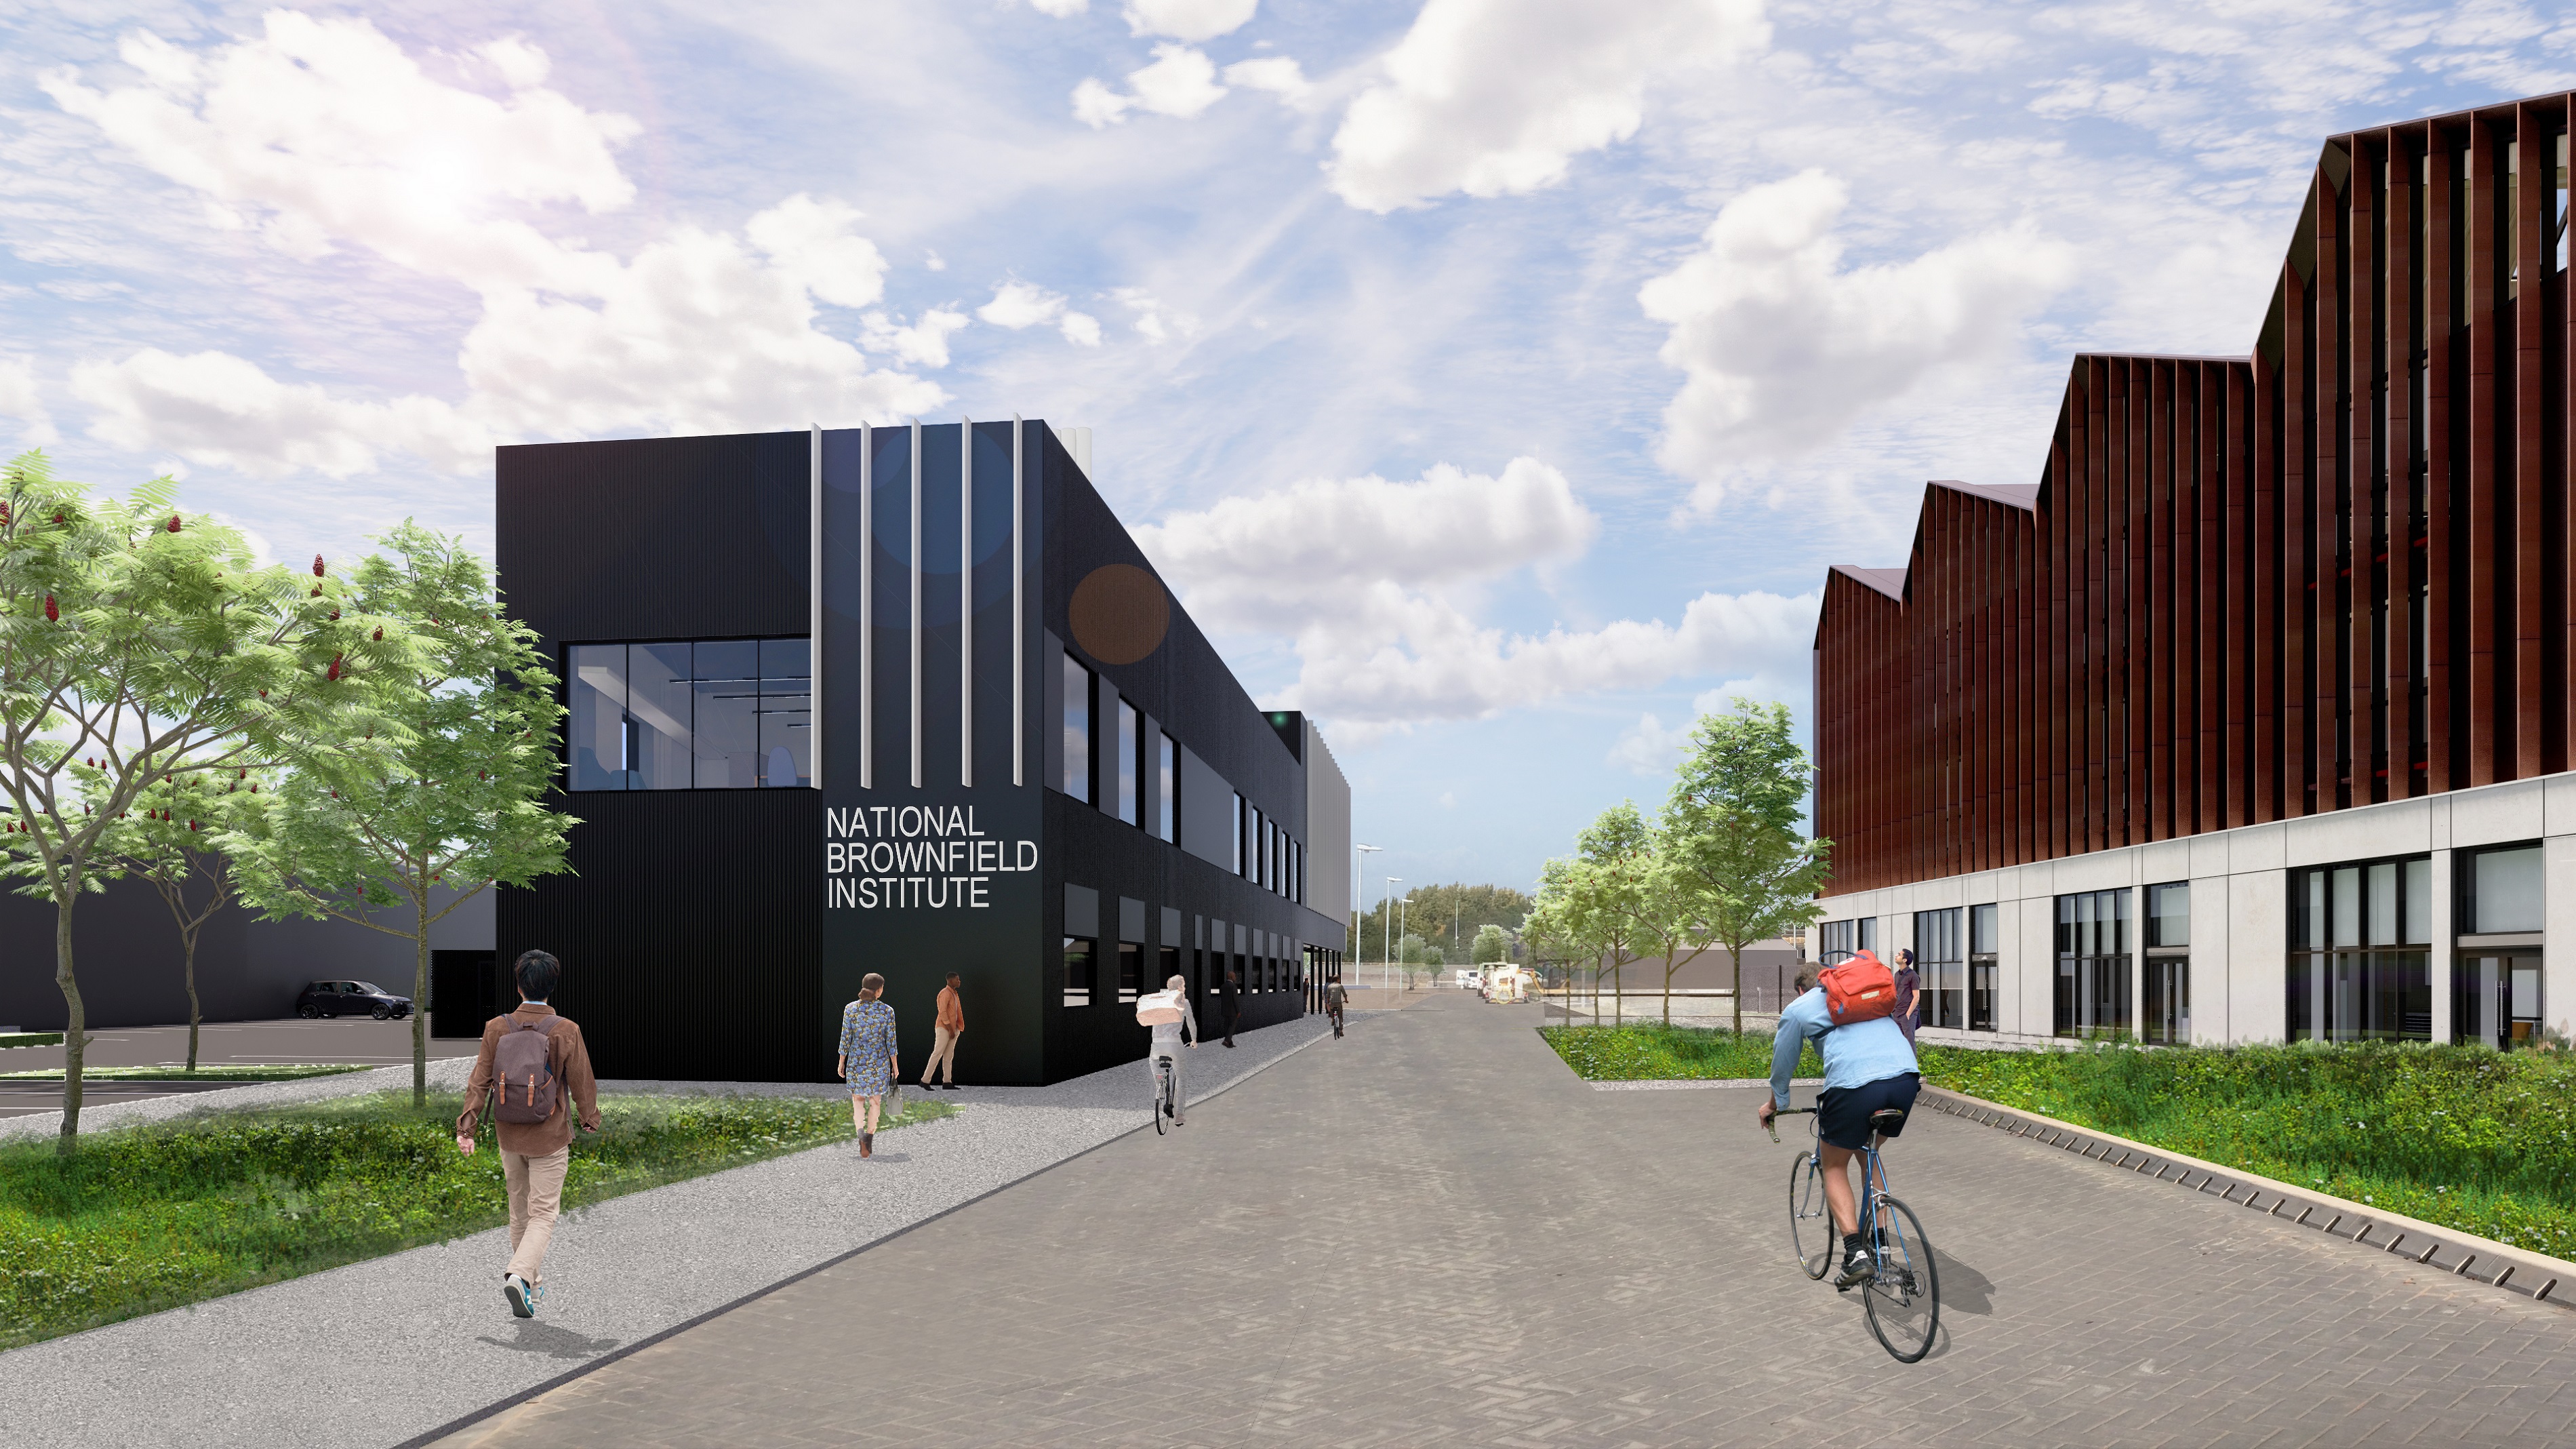 CGI image of how the new National Brownfield Institute will look